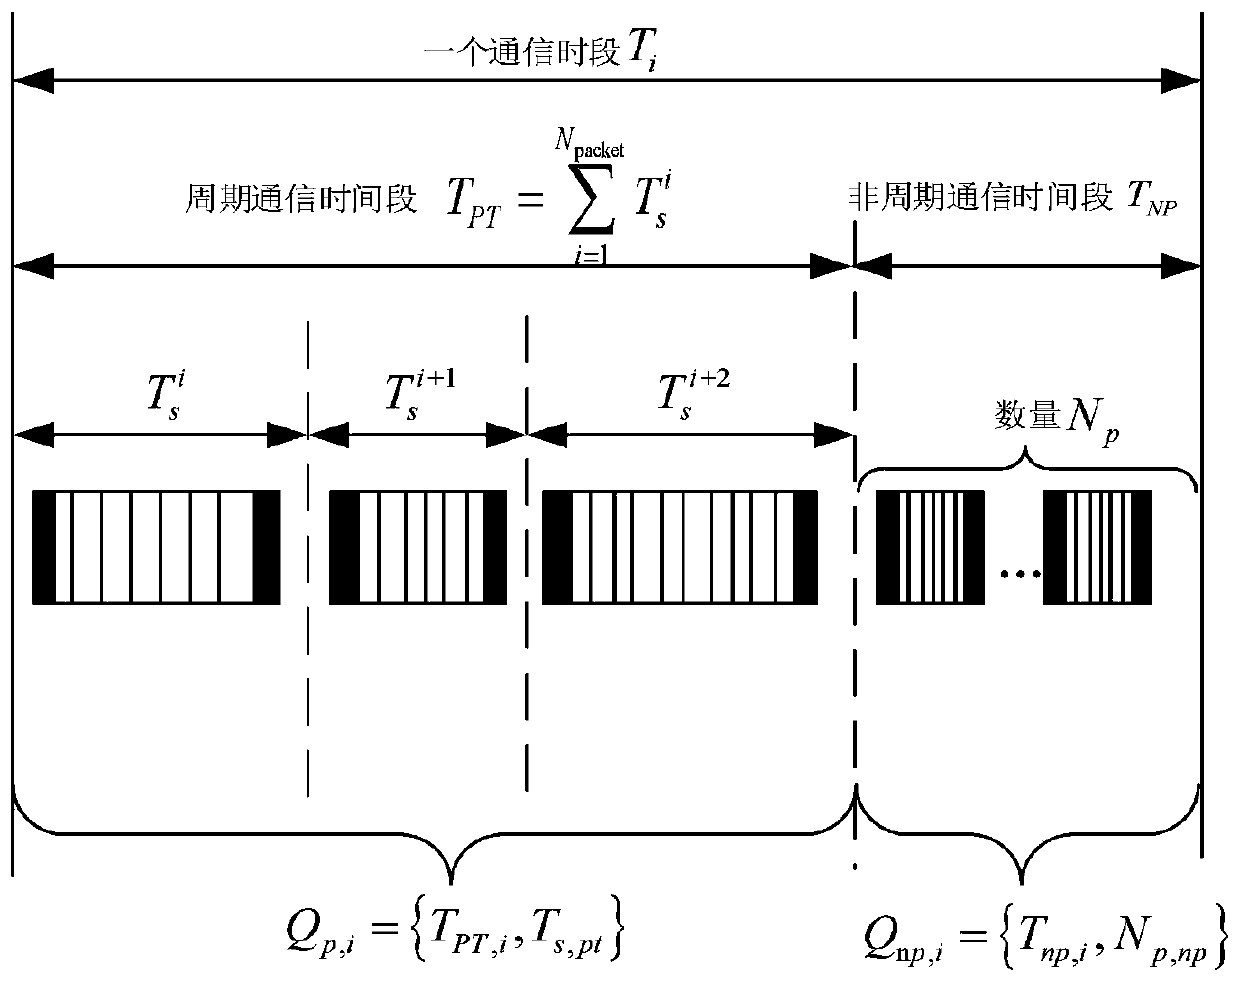 Traffic scheduling method for EtherCAT and time sensitive network